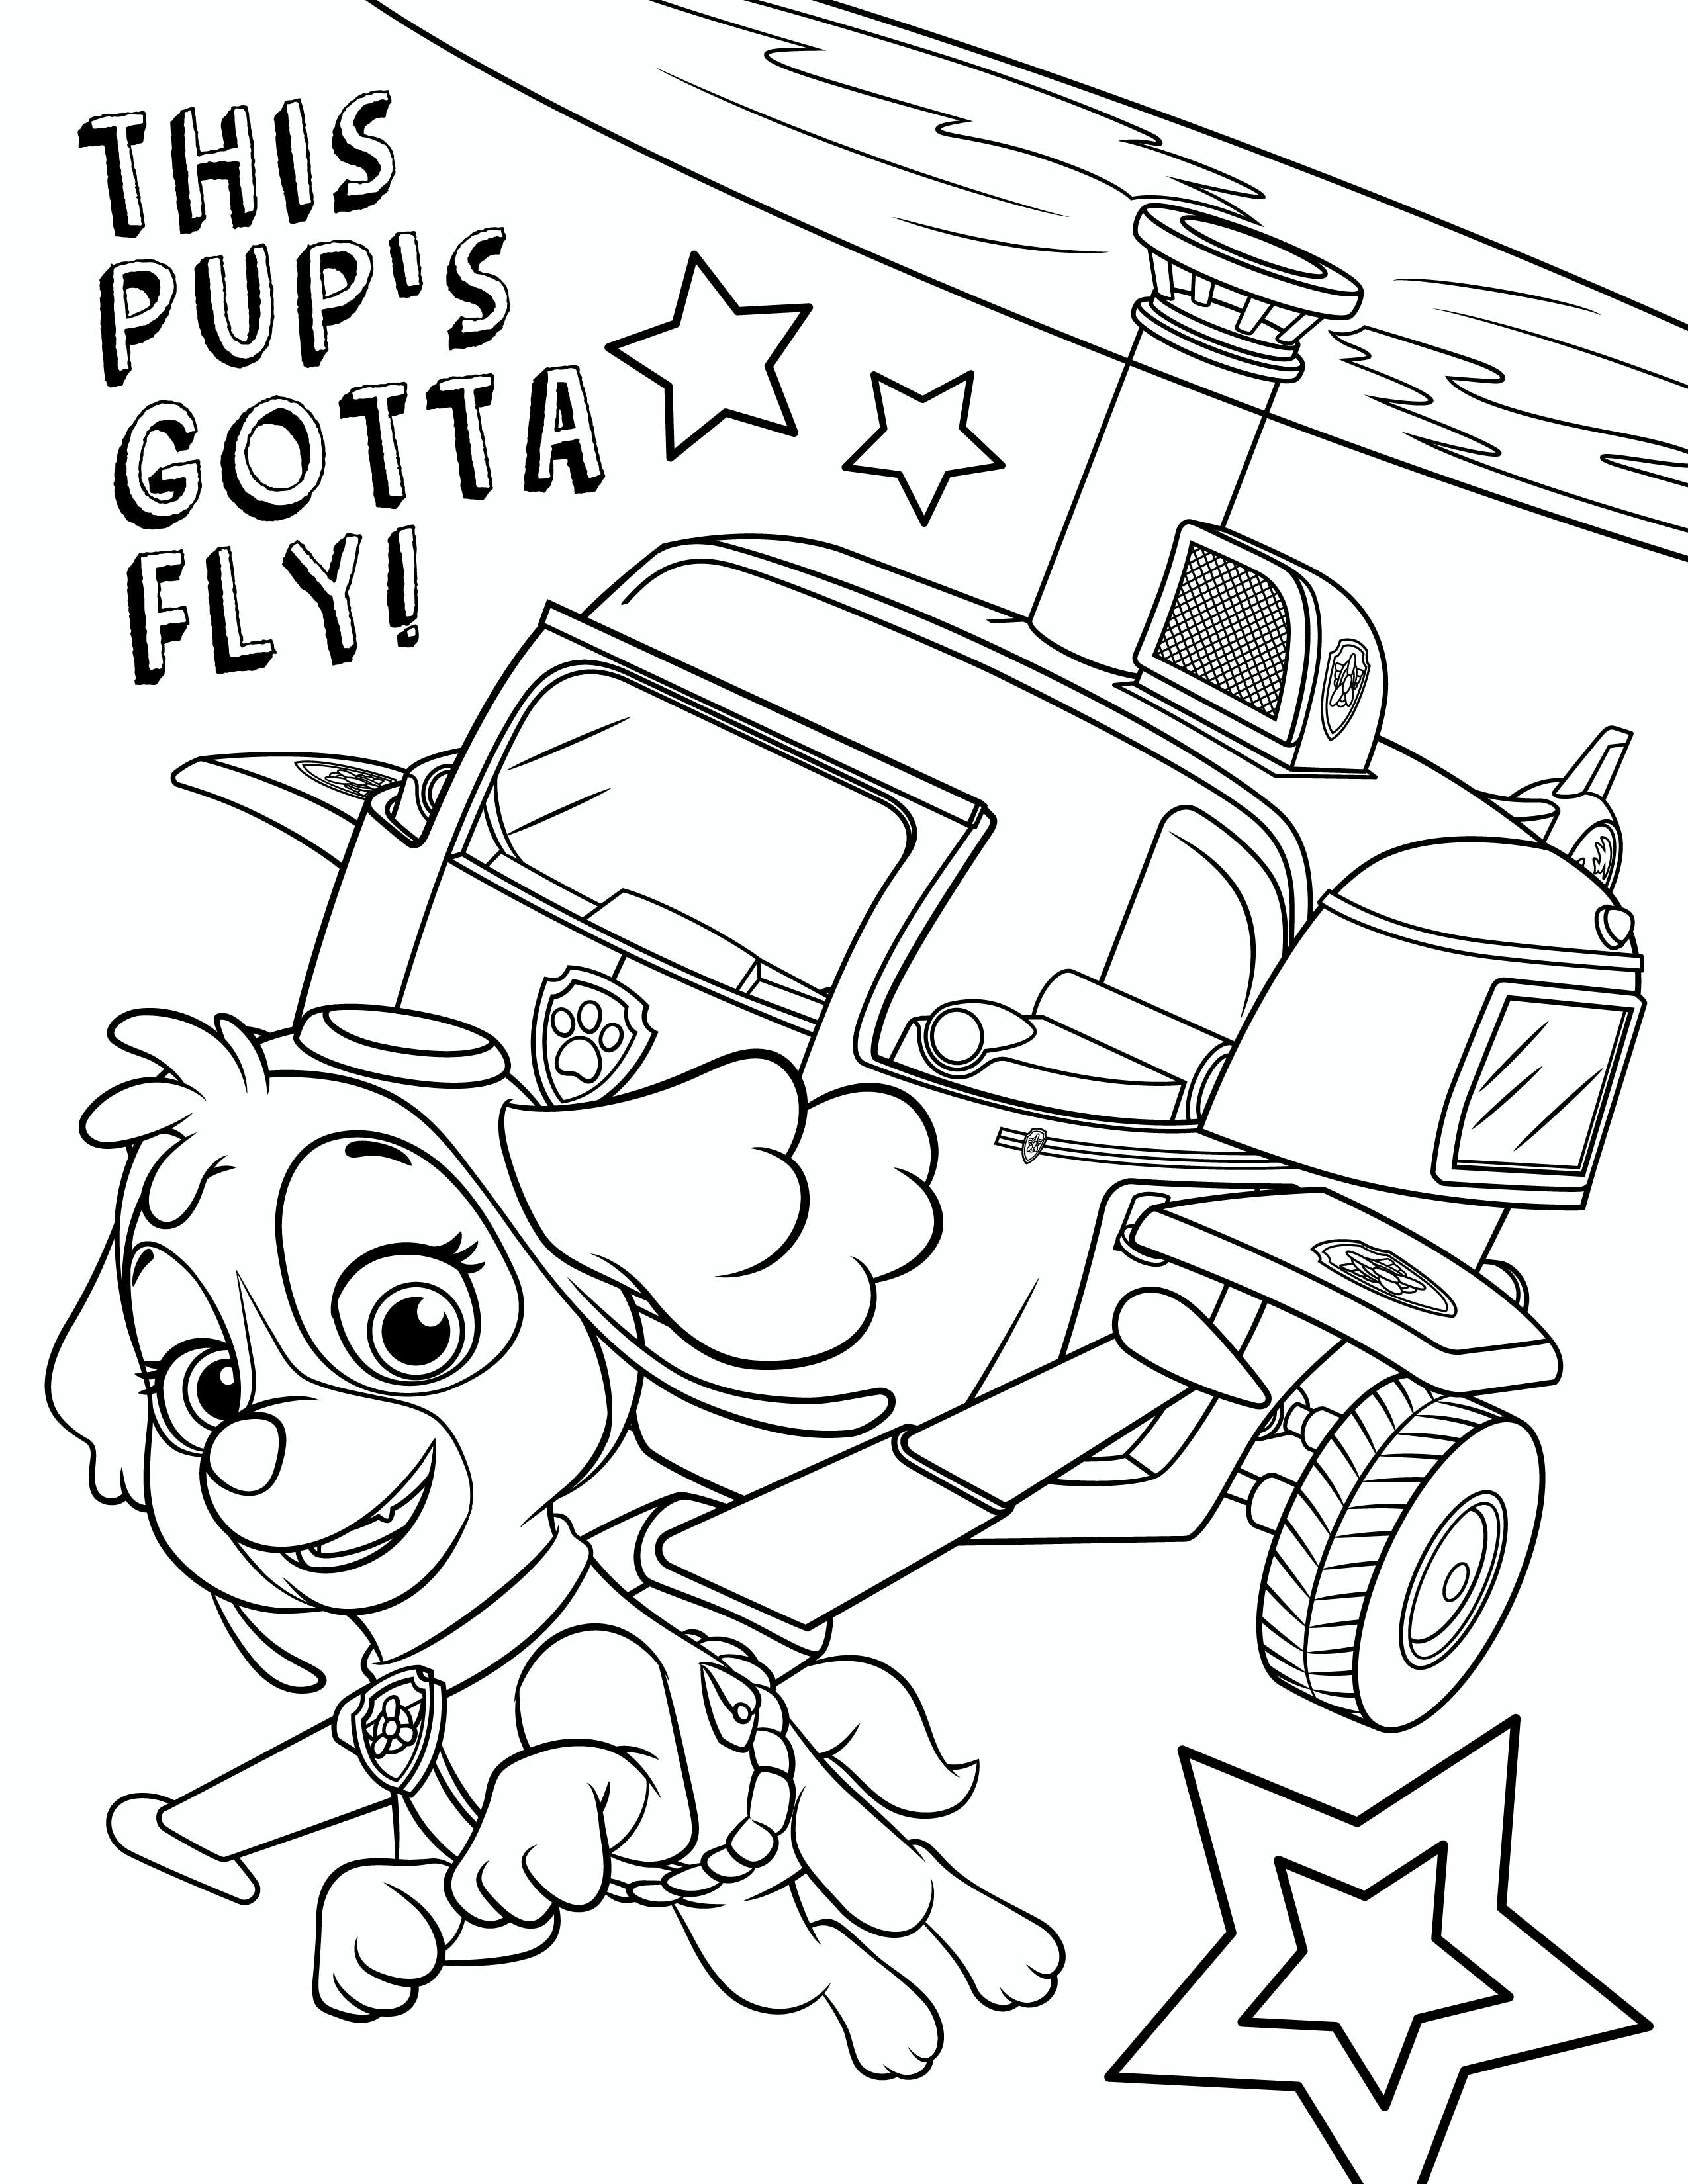 Coloring Pages : Free Paw Patrol Coloring Pages Party Ideas - Free Printable Paw Patrol Coloring Pages